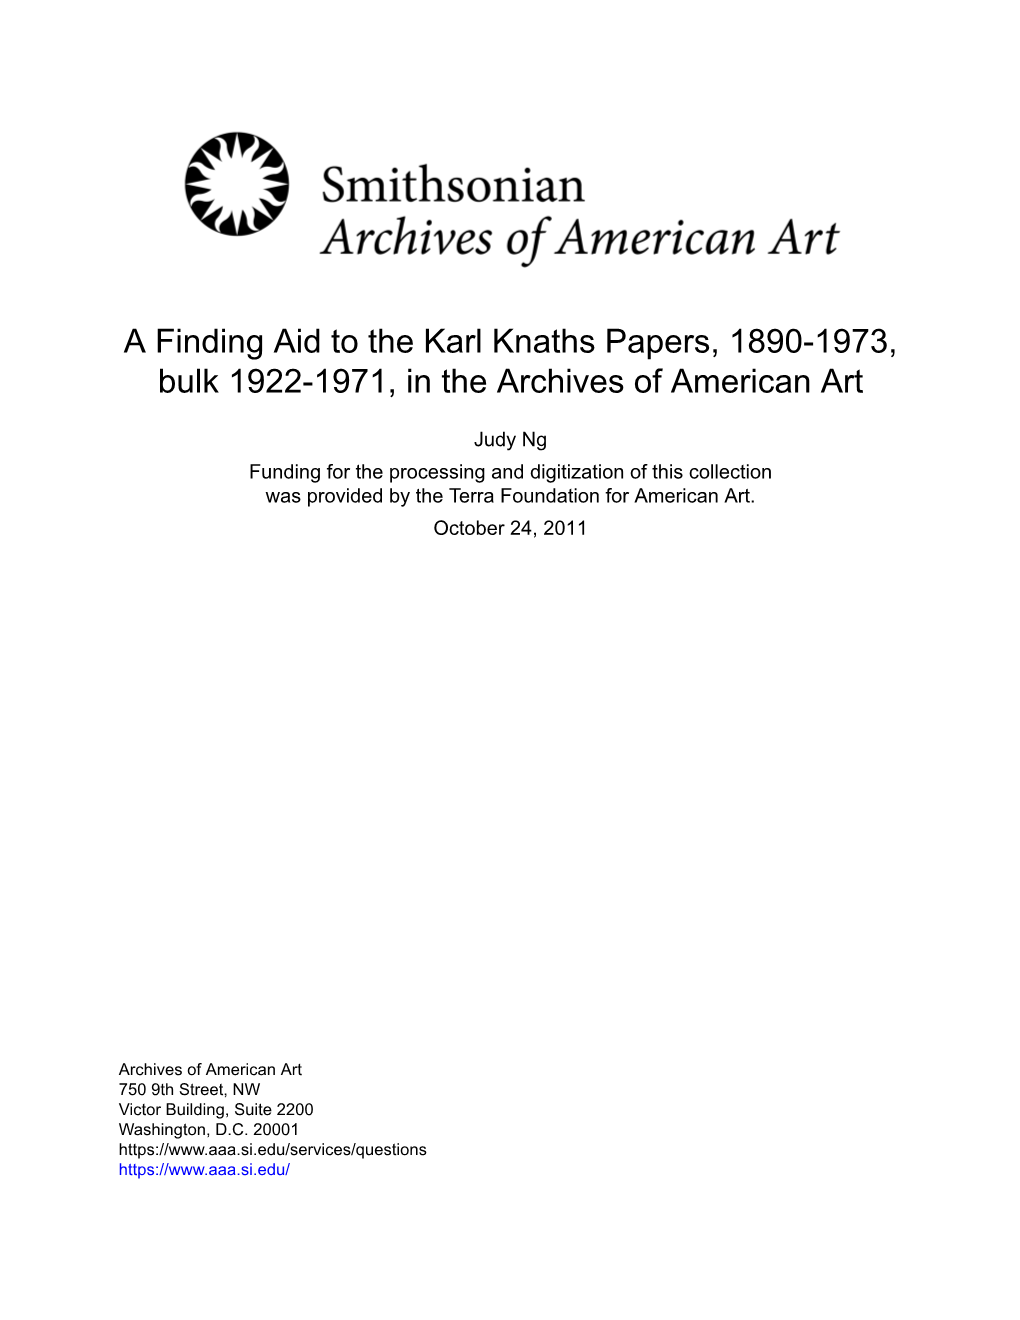 A Finding Aid to the Karl Knaths Papers, 1890-1973, Bulk 1922-1971, in the Archives of American Art